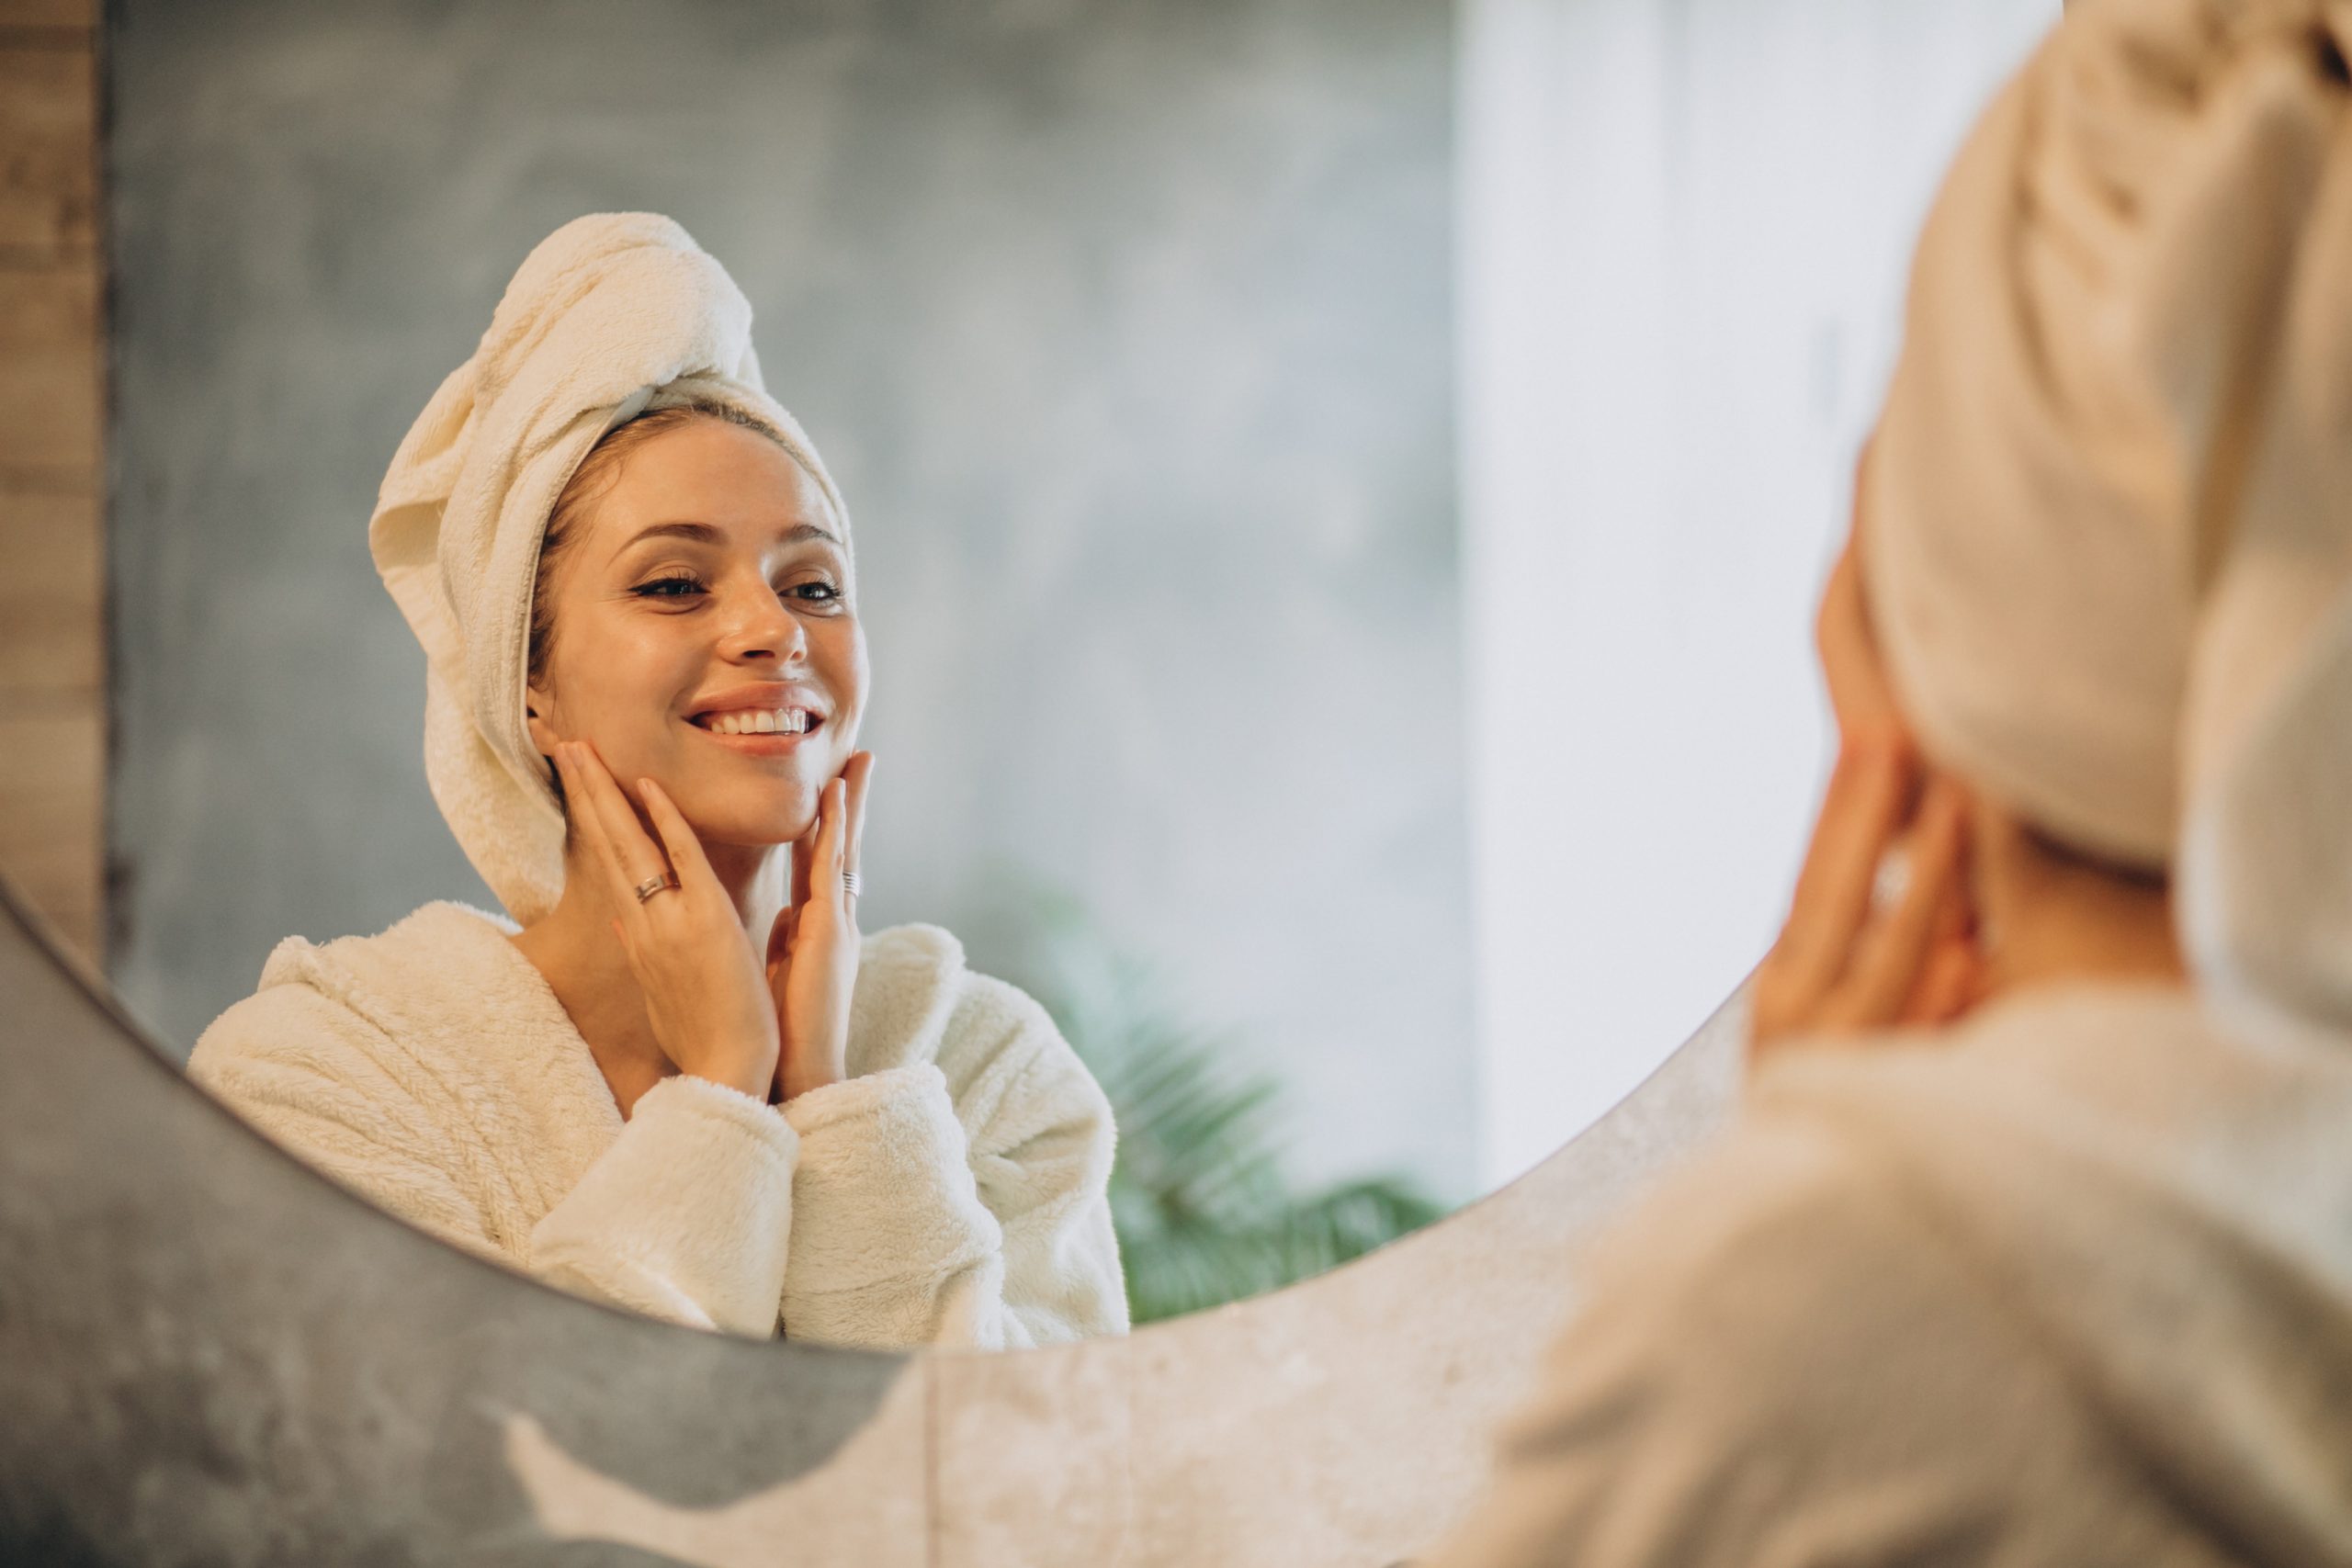 Skin Care: How to Make The Most Out Of Your Nighttime Skincare Routine